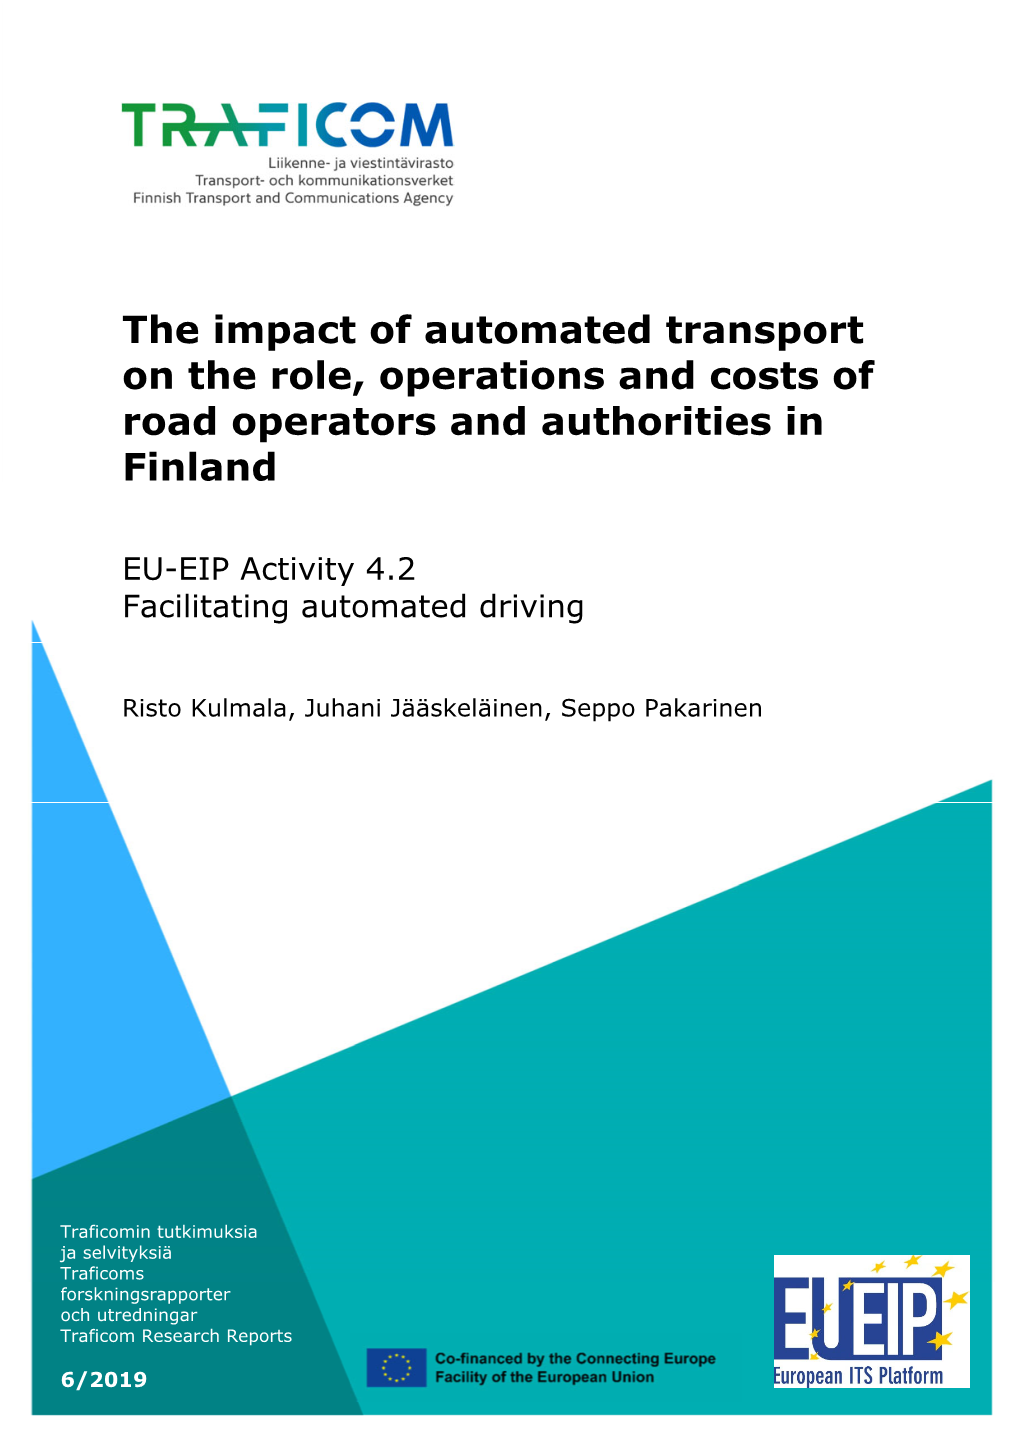 The Impact of Automated Transport on the Role, Operations and Costs of Road Operators and Authorities in Finland